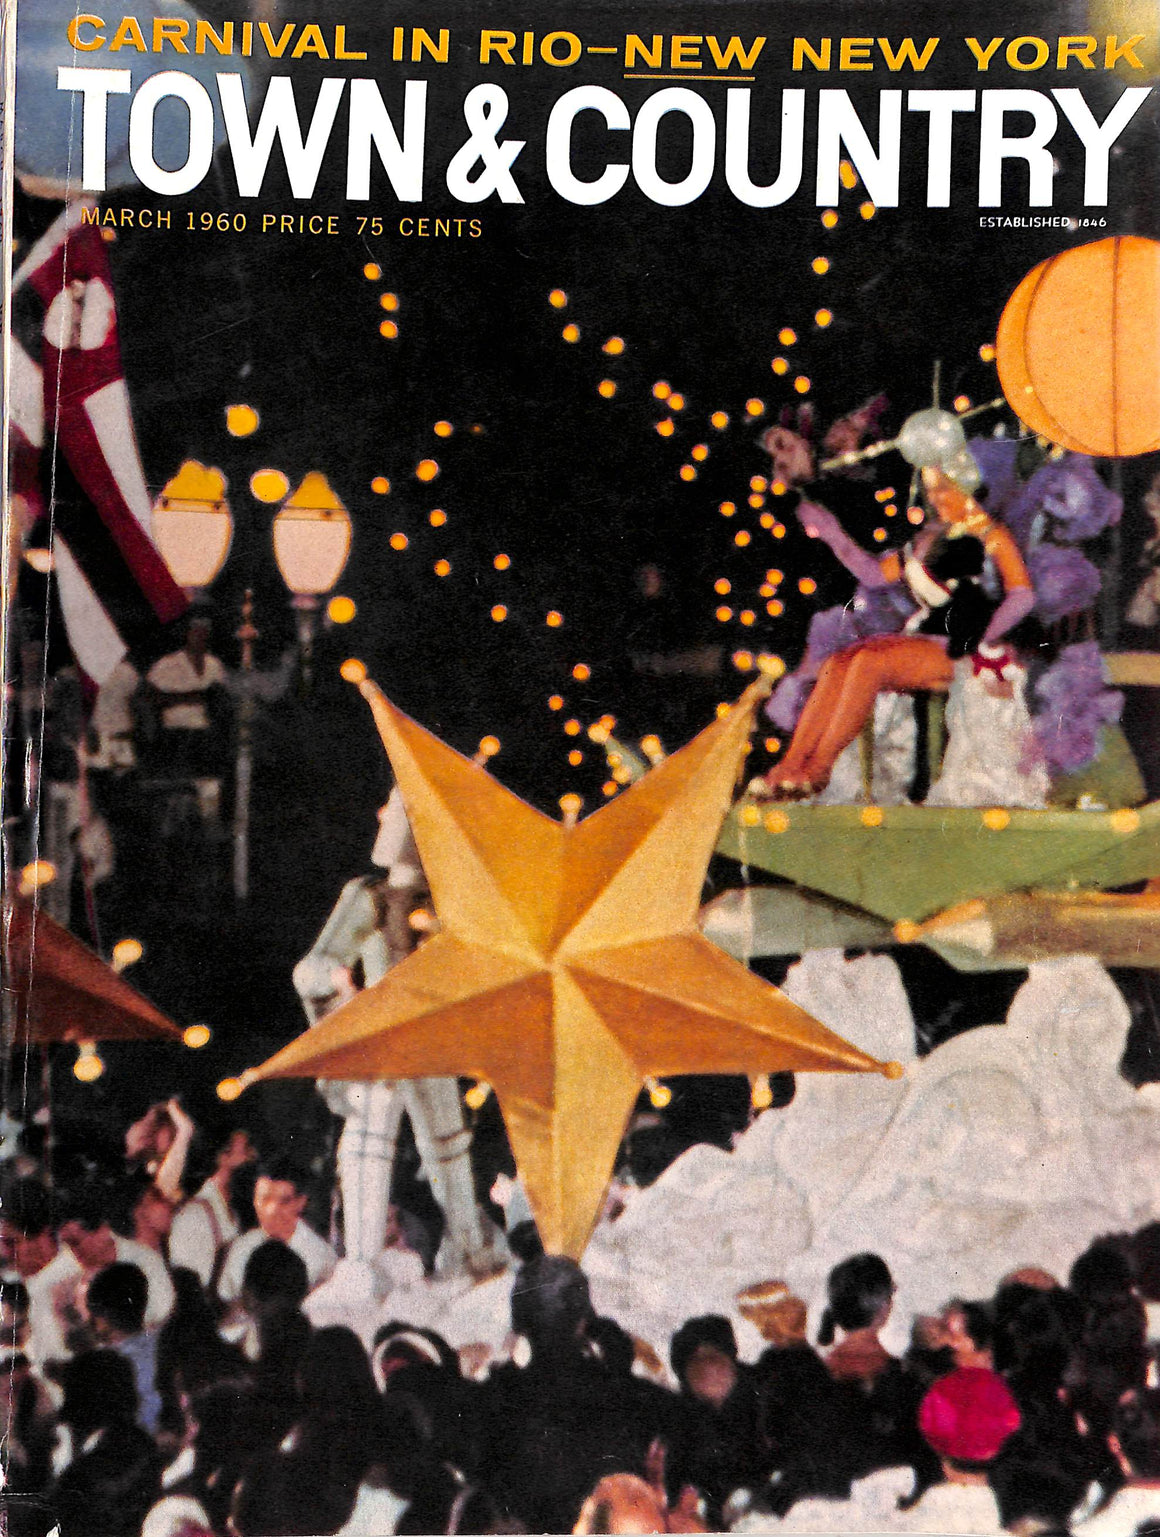 "Town & Country March 1960 Carnival In Rio- New New York" 1960